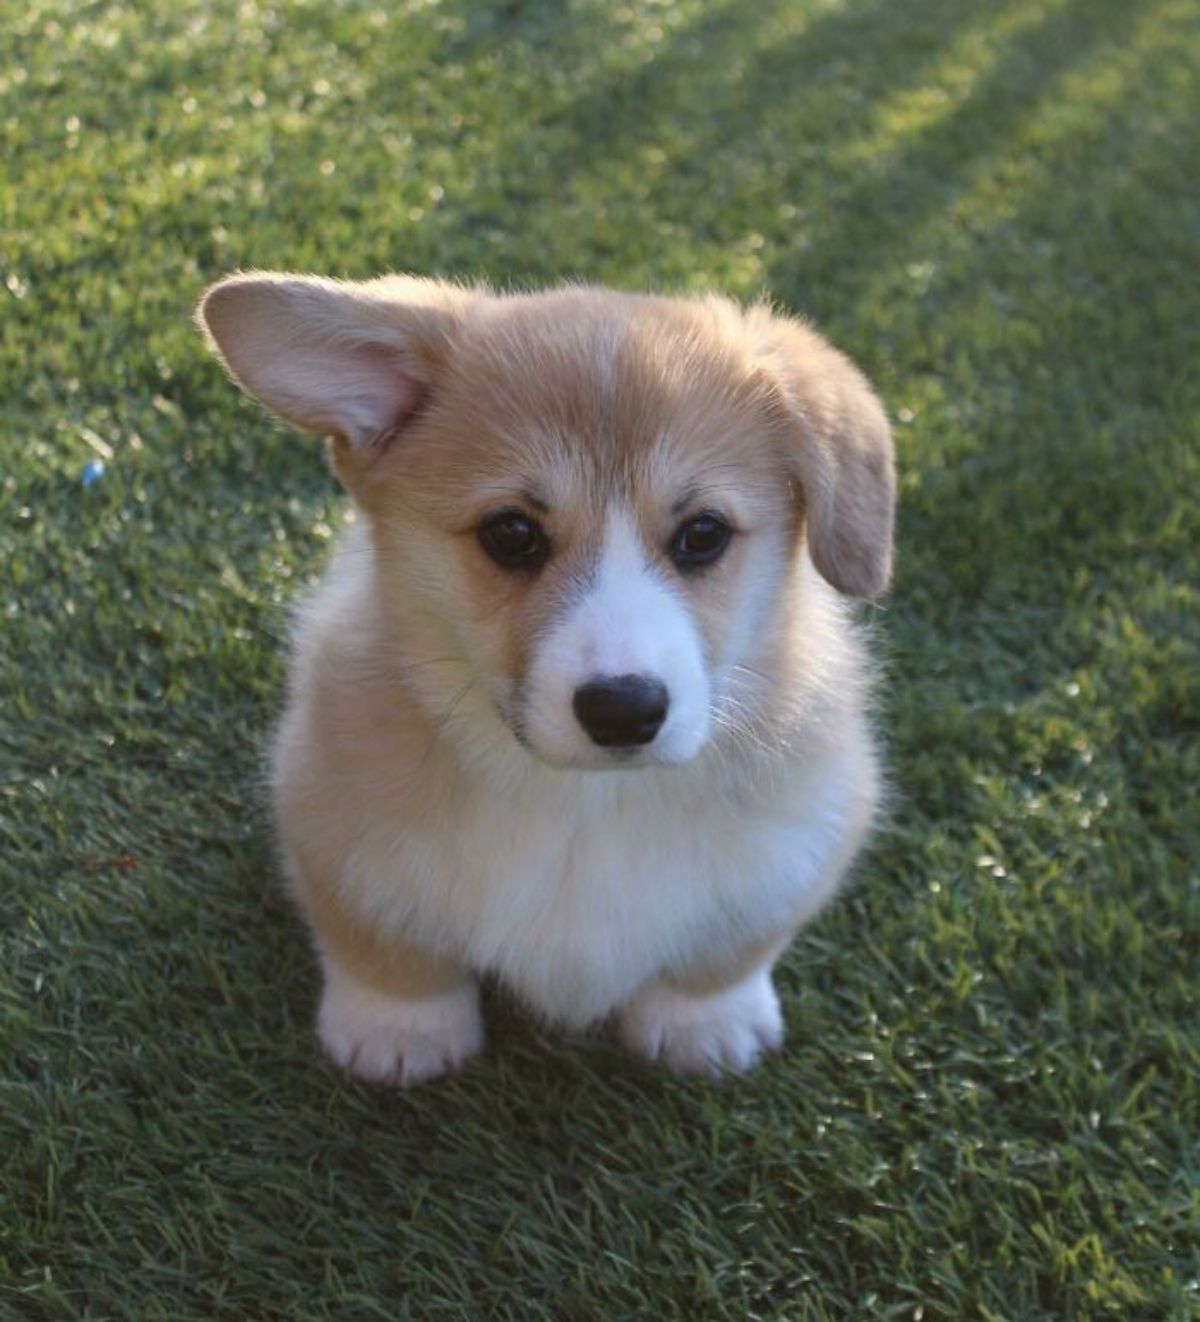 brown and white corgi puppy sitting on the grass and has one ear up while the other is floppy